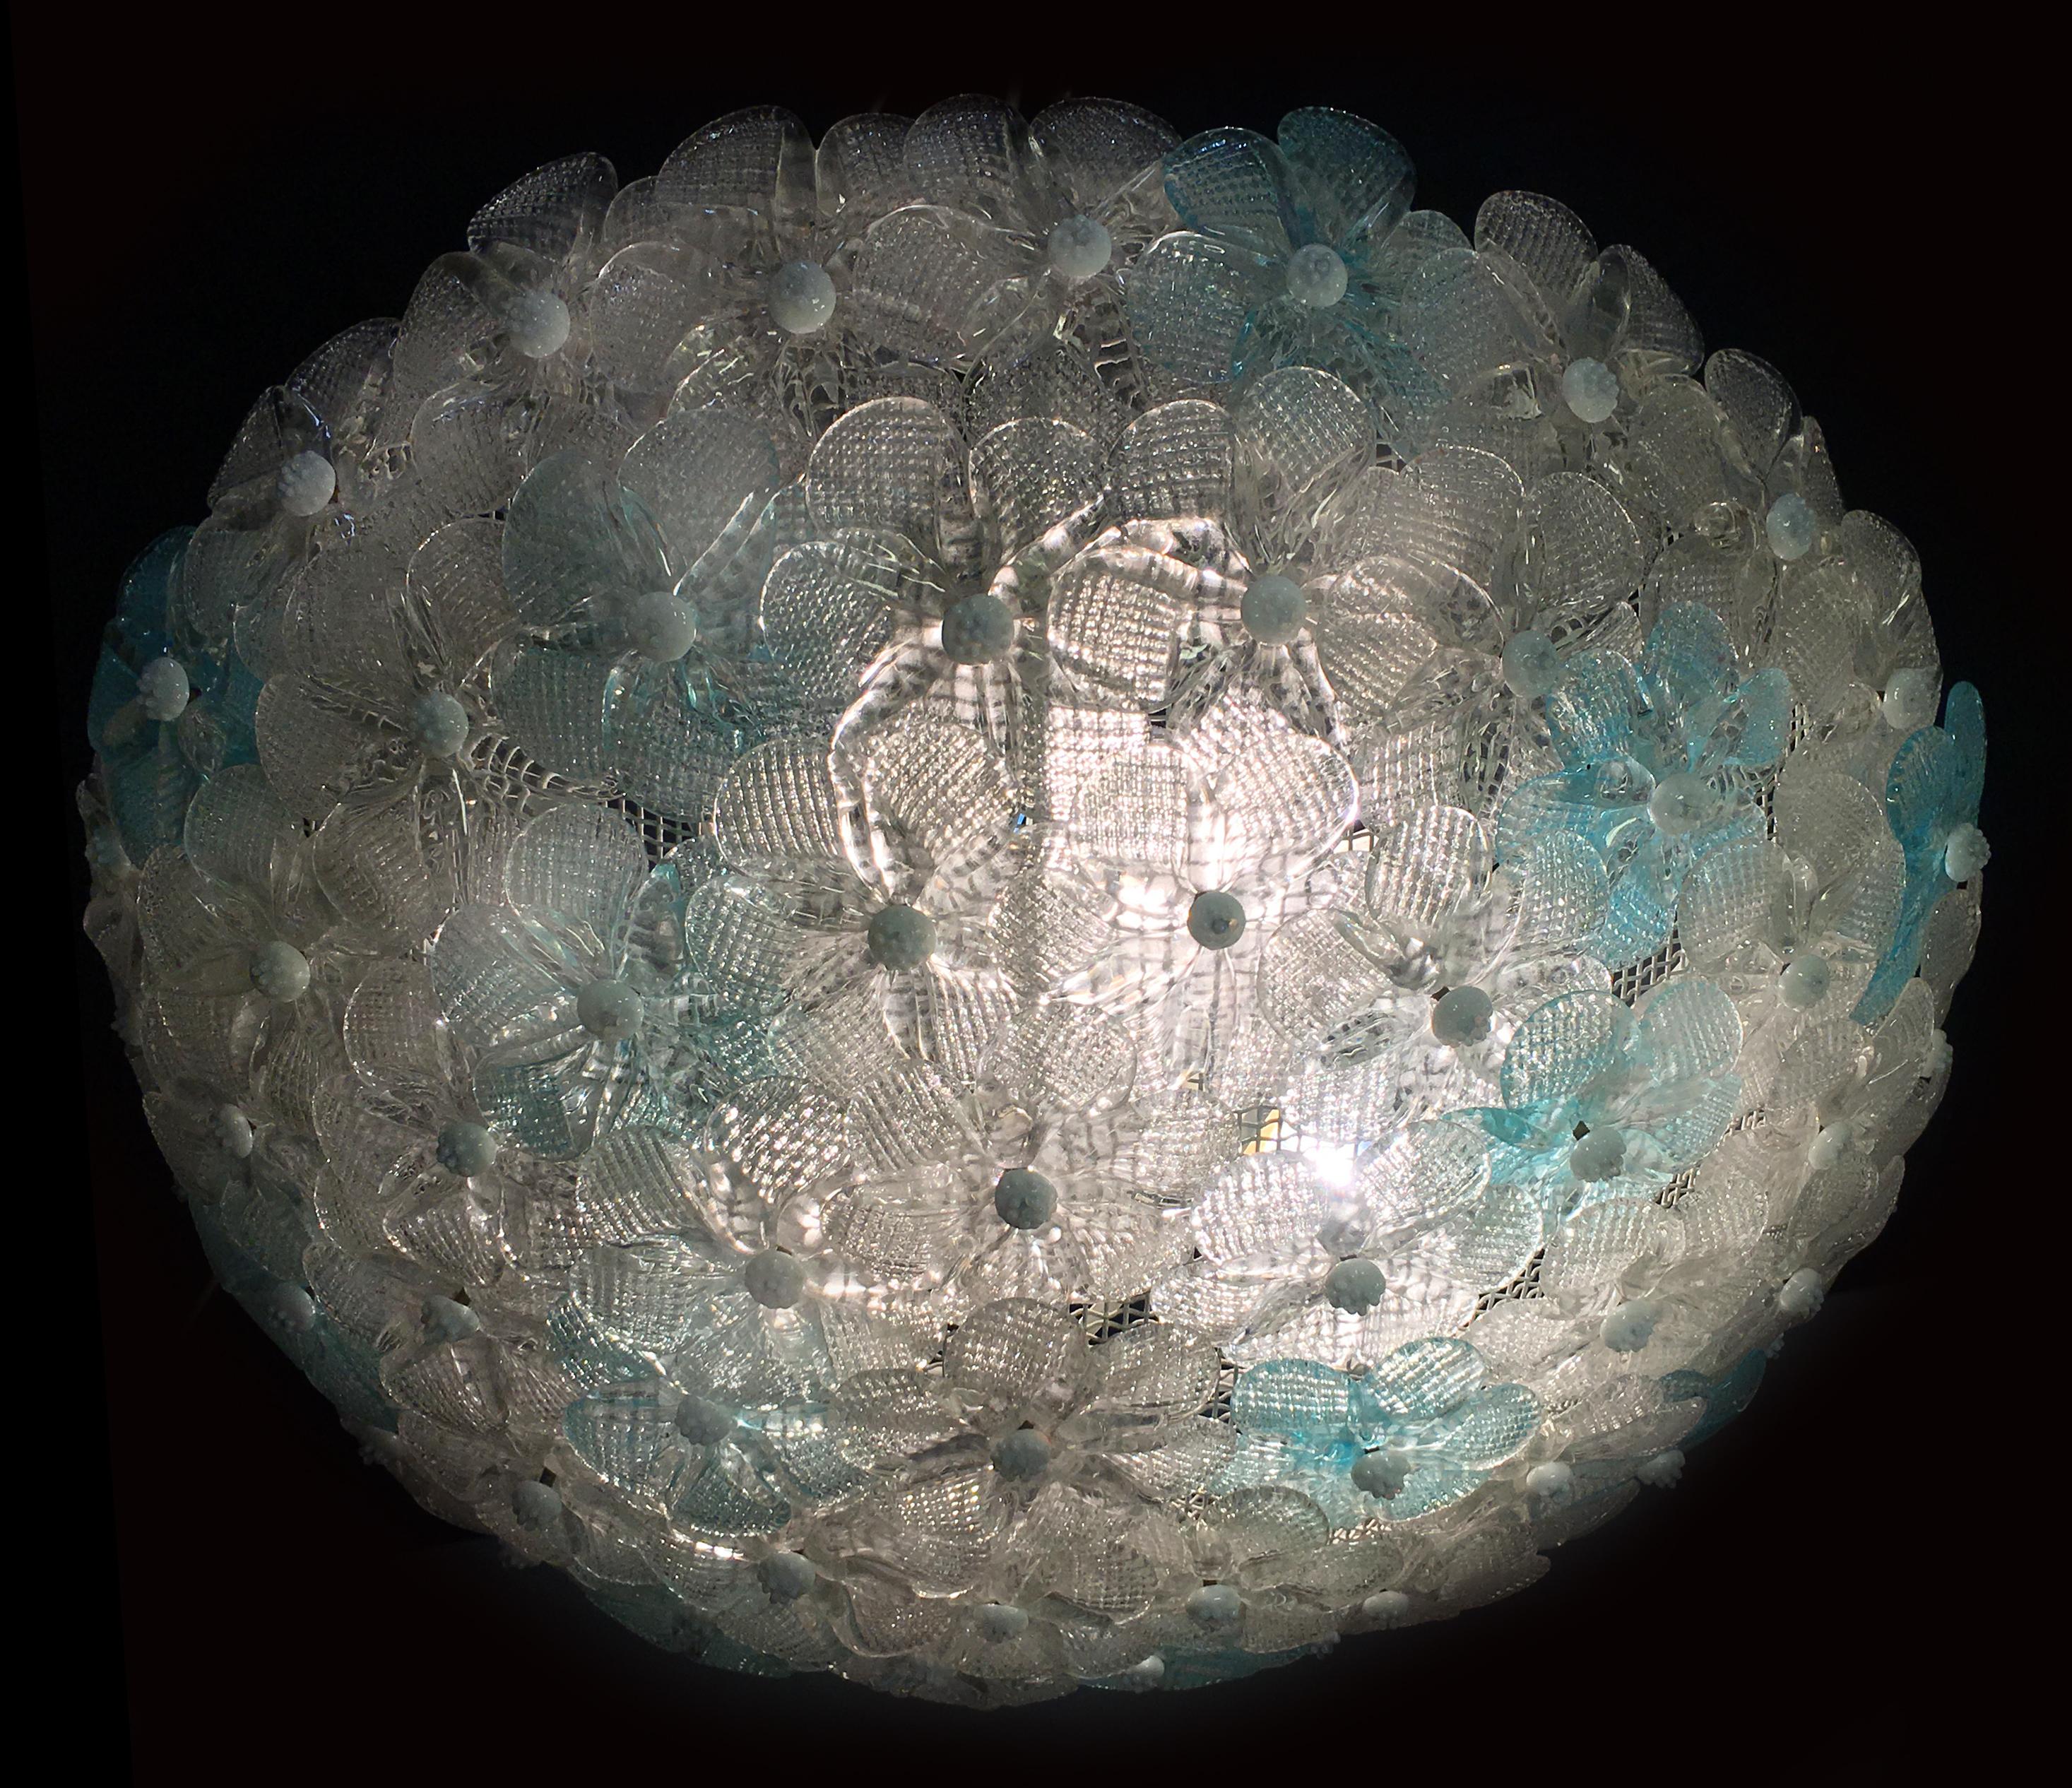 The ceiling lamp is made of dozens of small roses in precious Murano glass. Measures:
Diameter 43 cm
Height 17 cm.